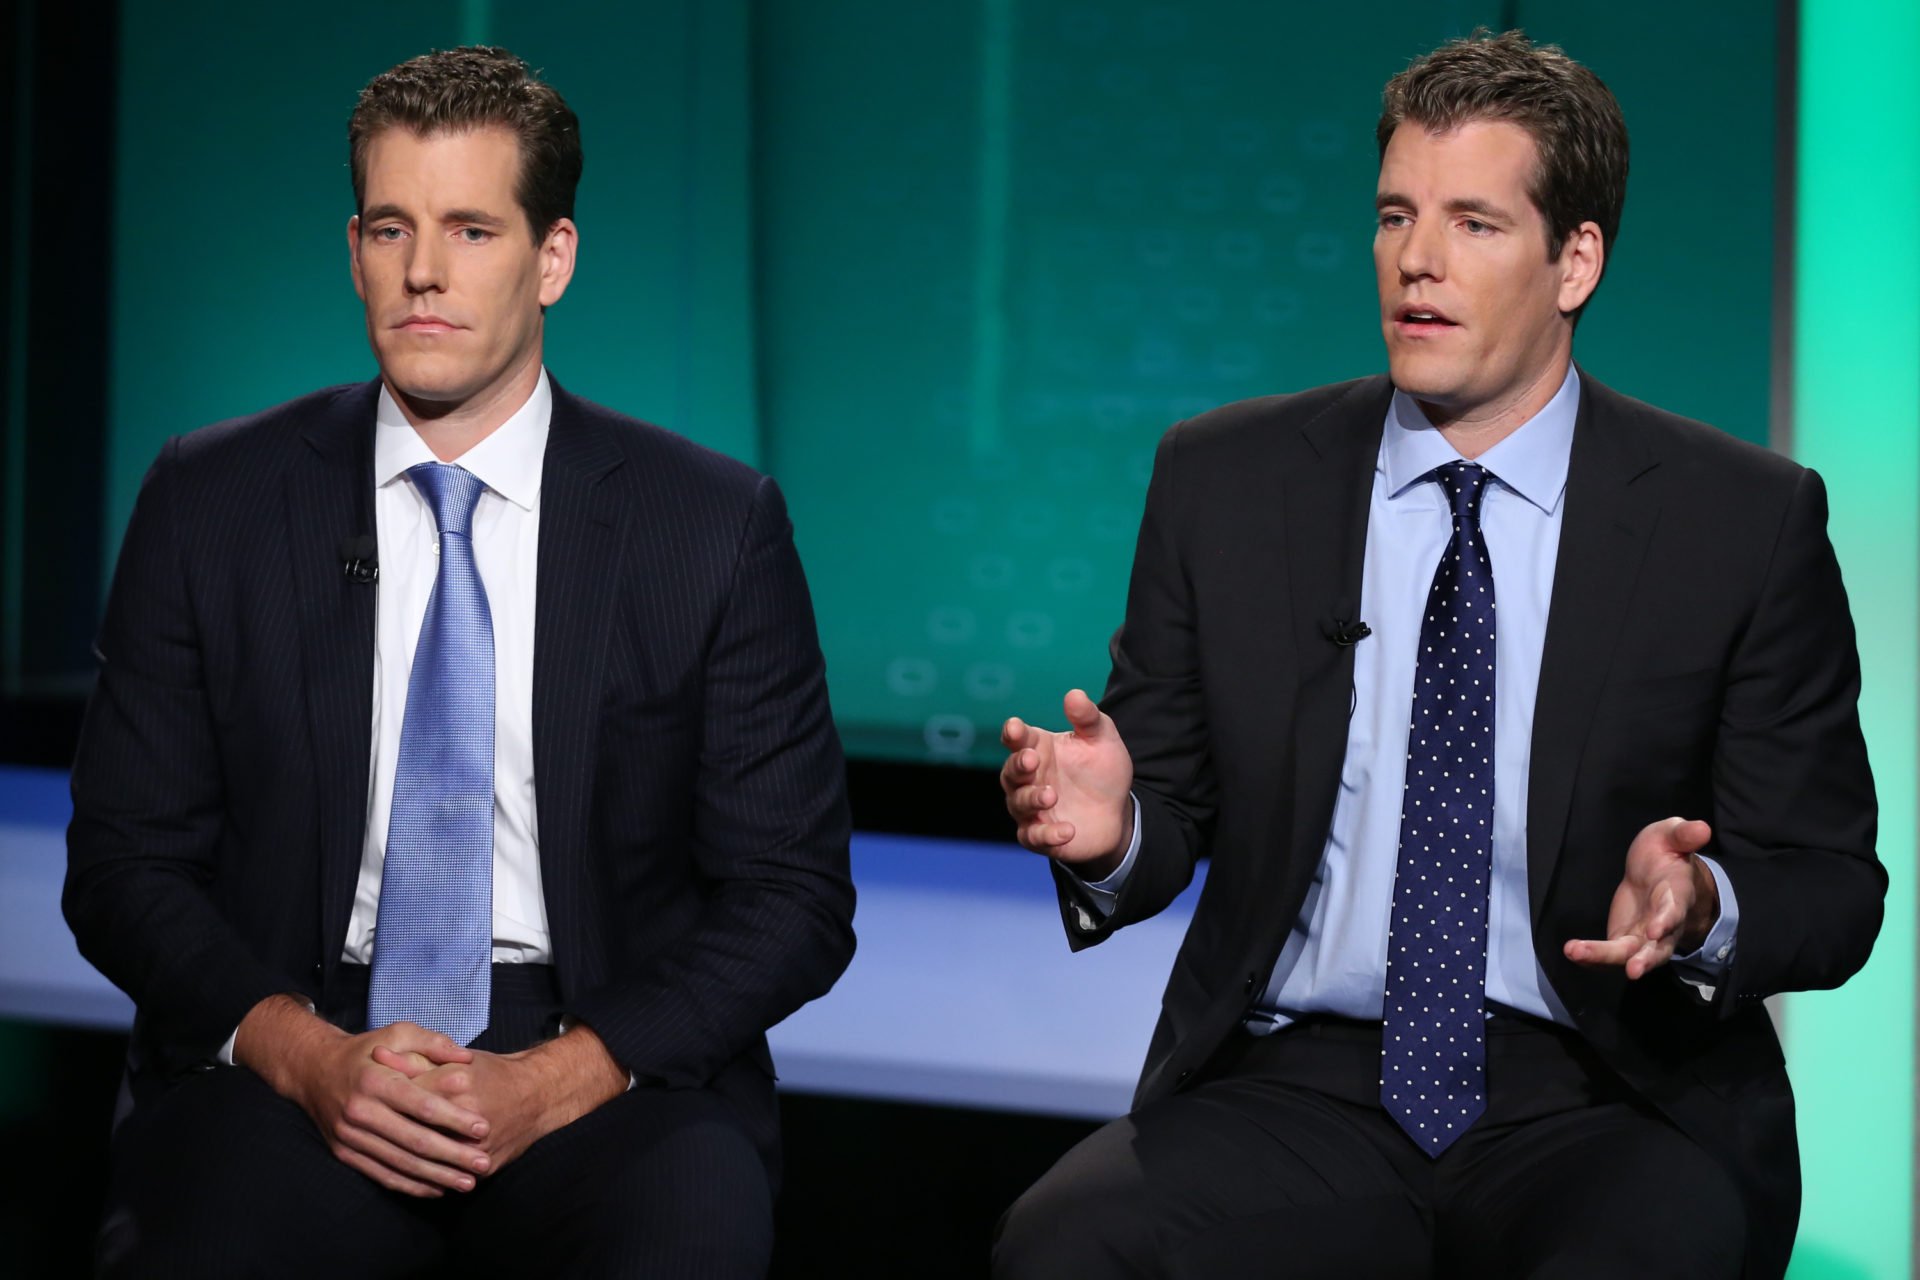 Winklevoss Twins donated $130,000 to New York Governor prior to License Granting